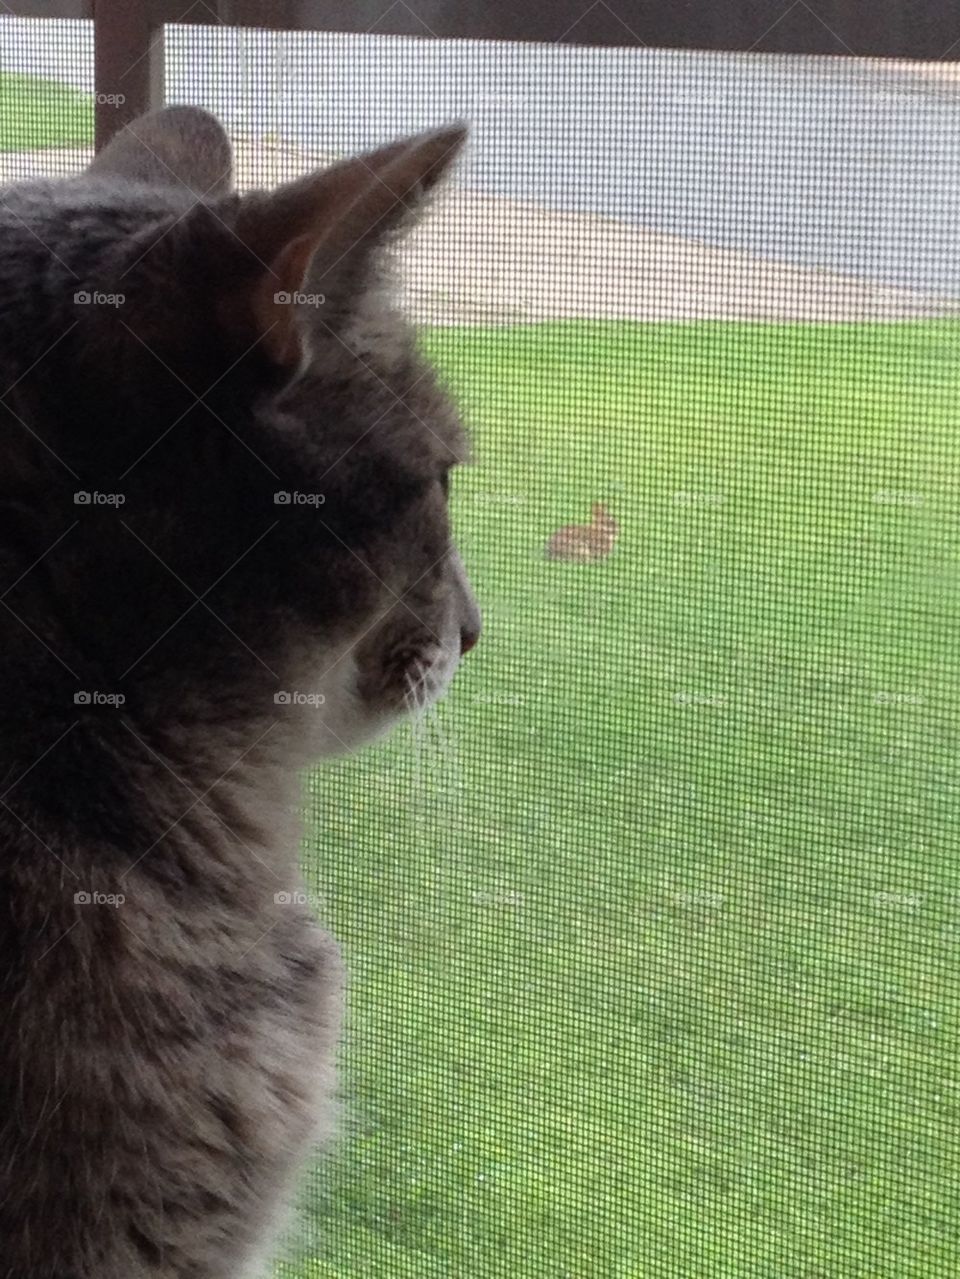 Cat watching the bunny